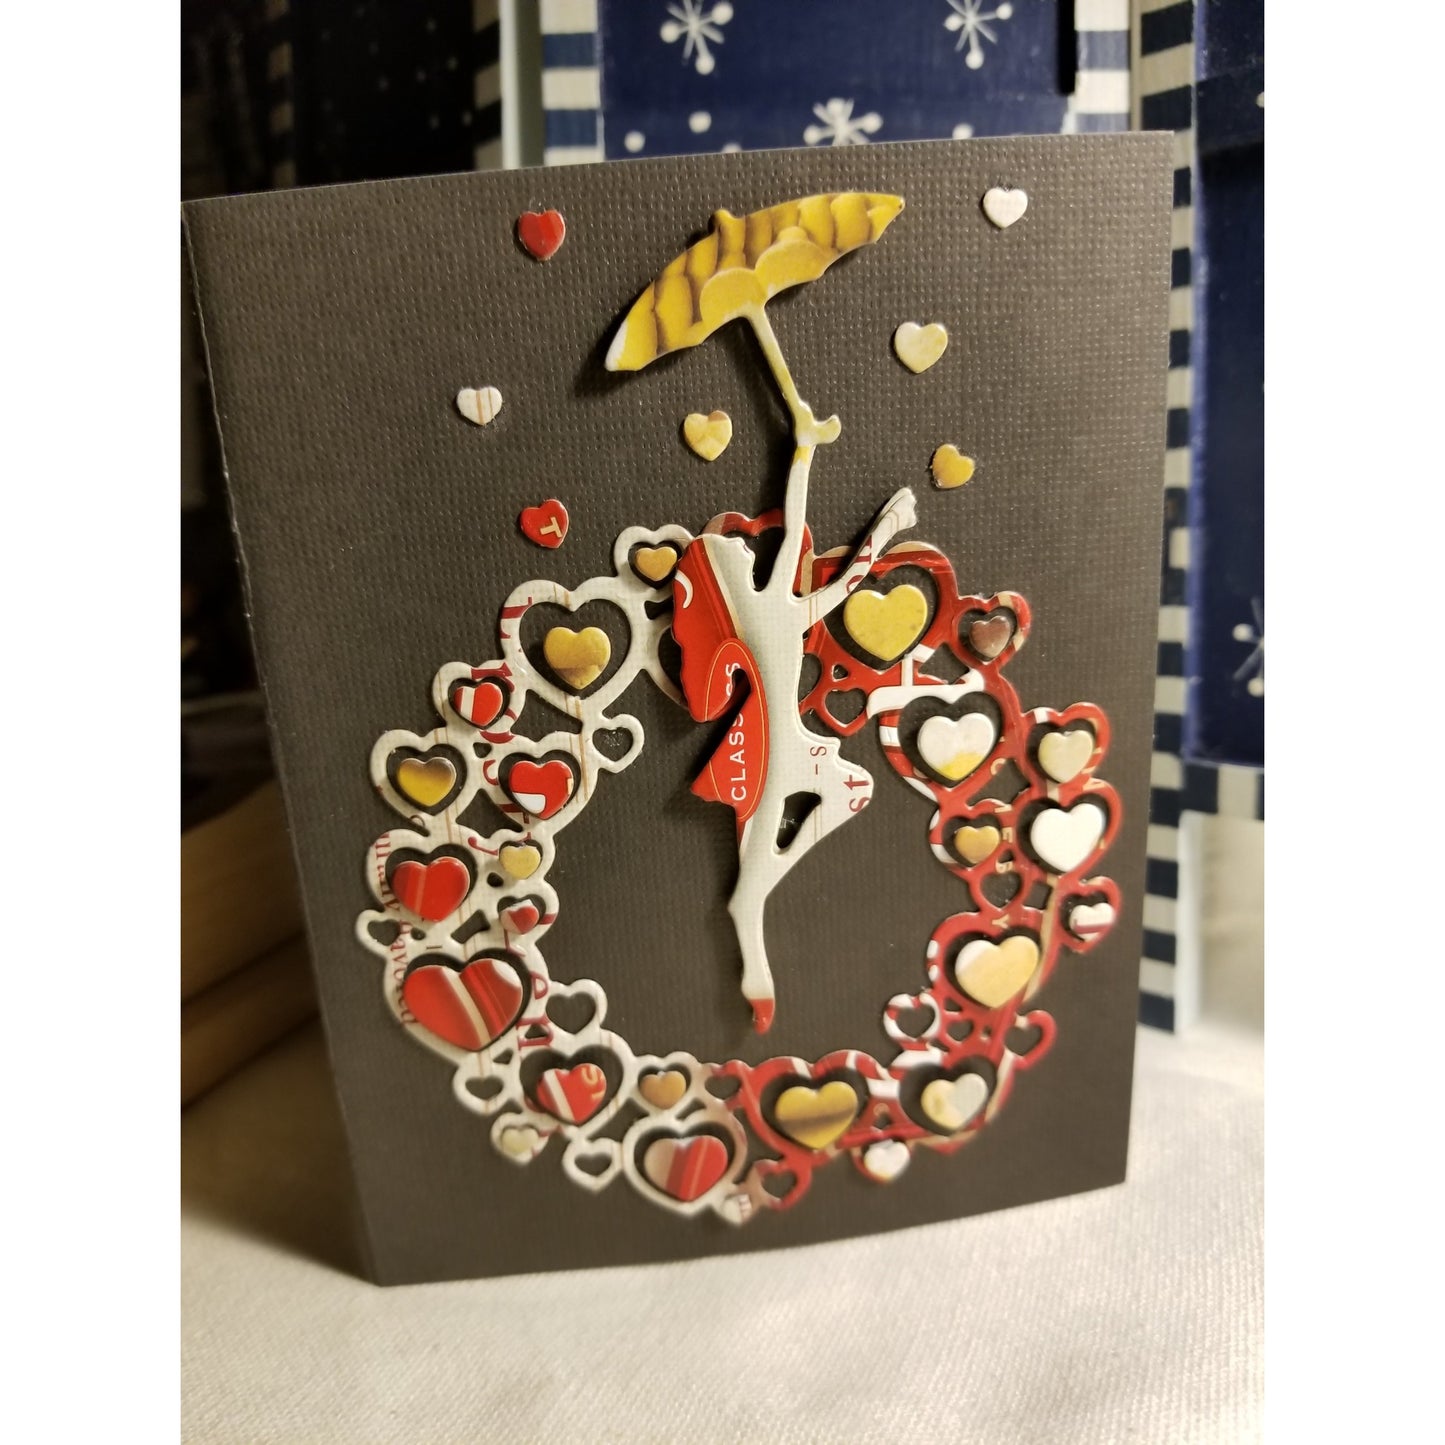 Showering You With Love Handmade Good Greeting Supply Card  💋